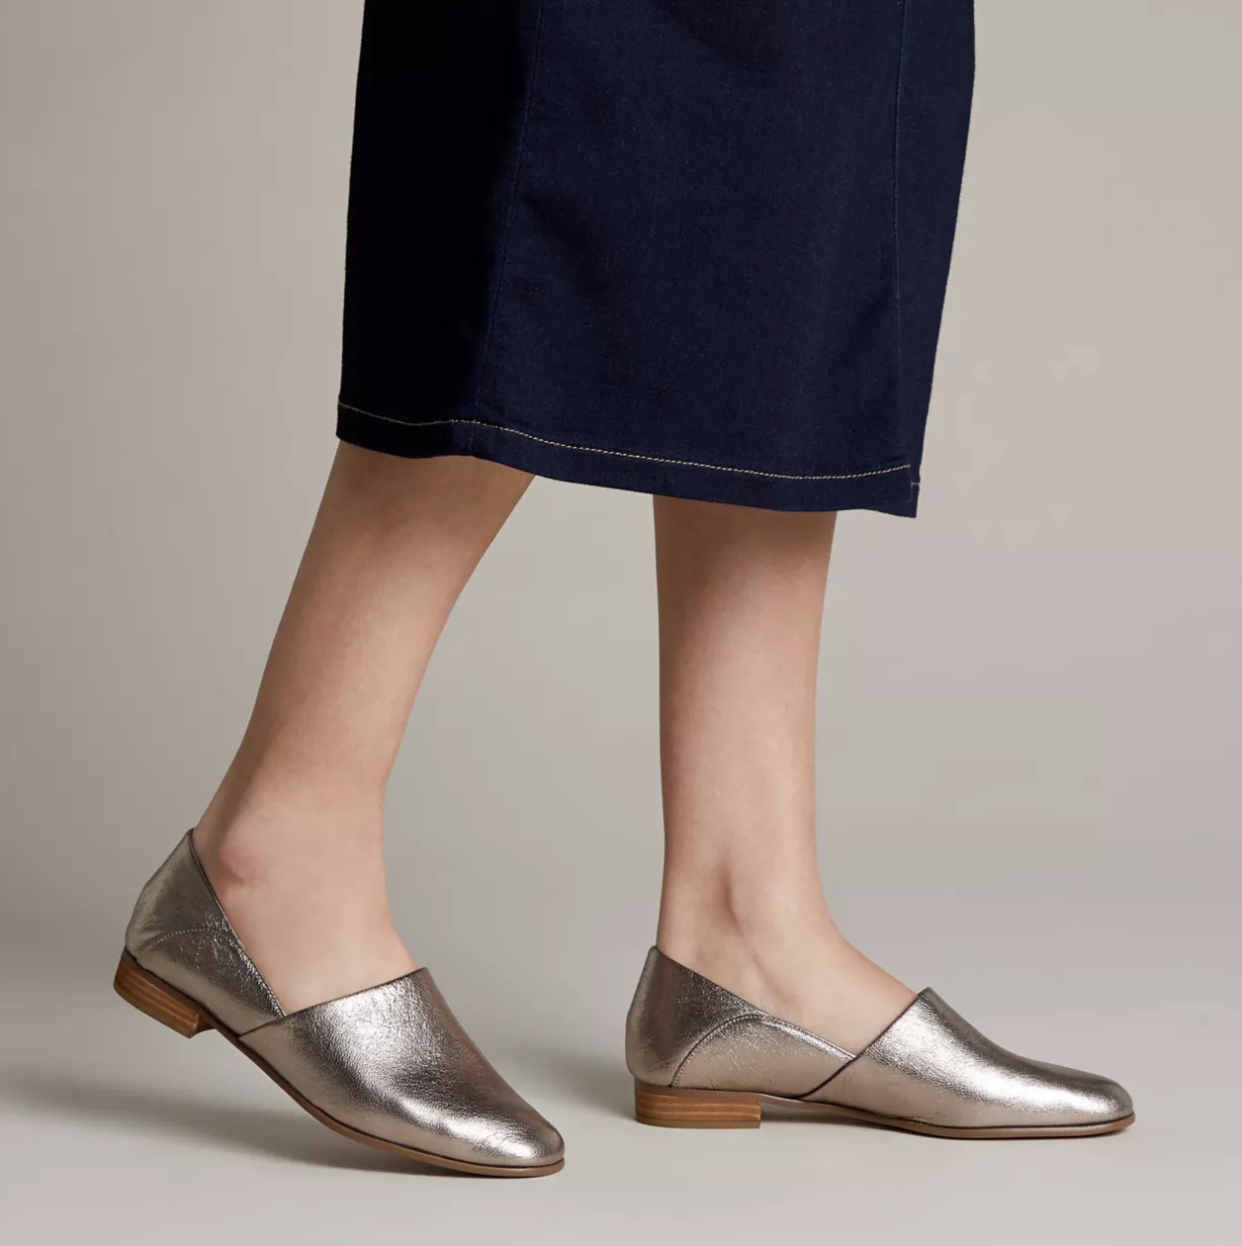 Add a touch of glitz and glam to your look. (Photo: Clarks)